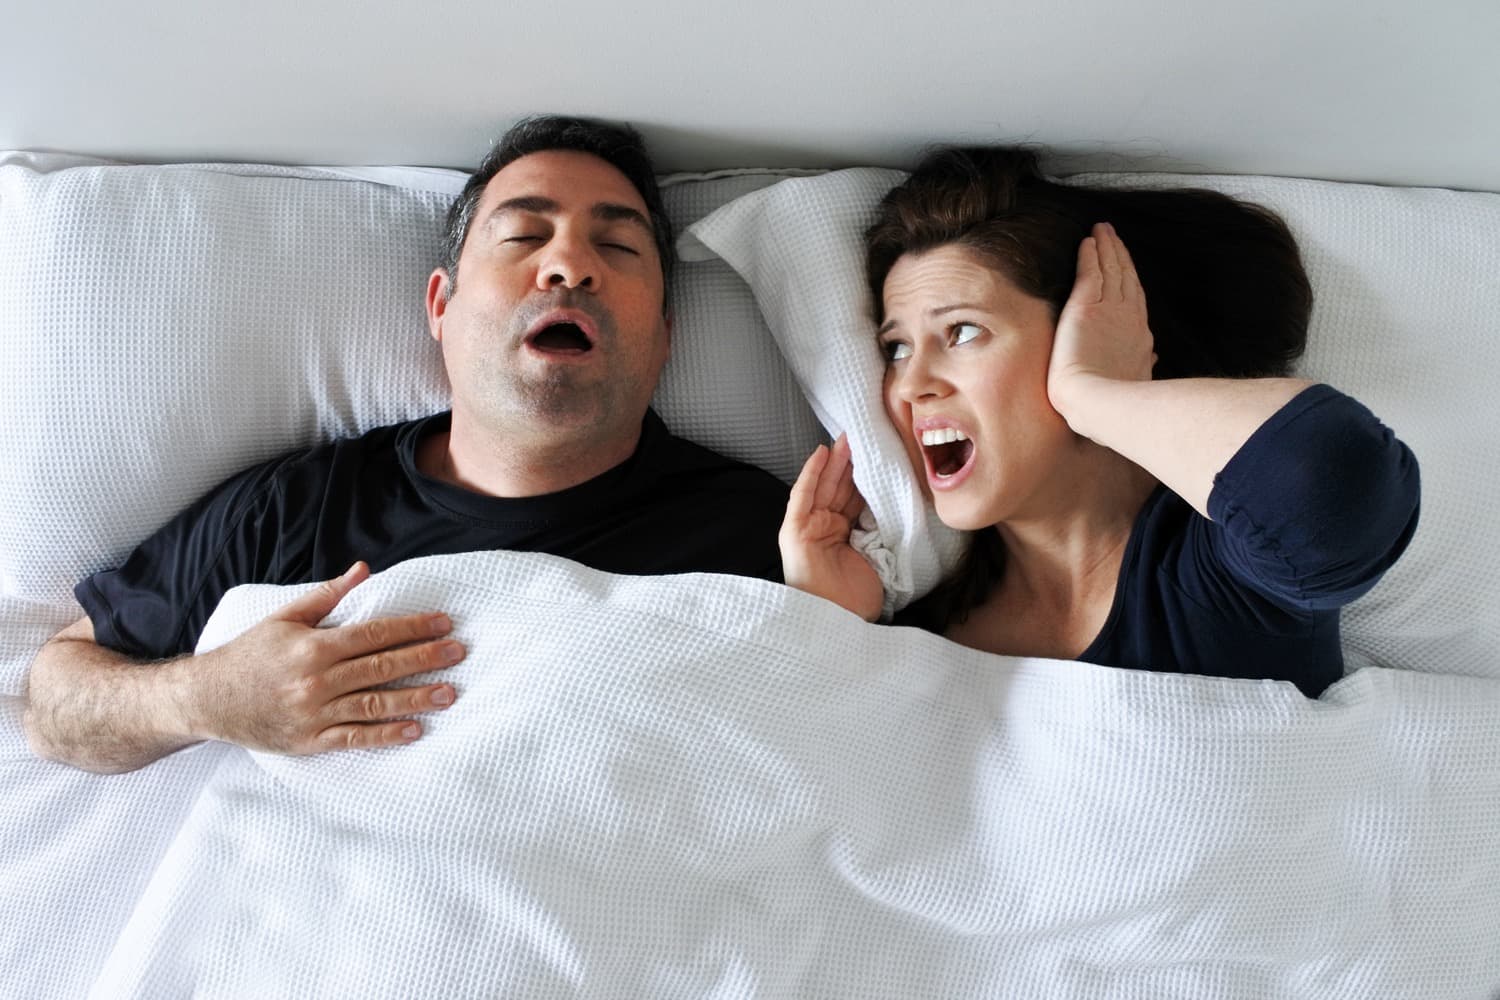 Women in bed with partner covering her ears with a look of frustration over partner snoring loudly.